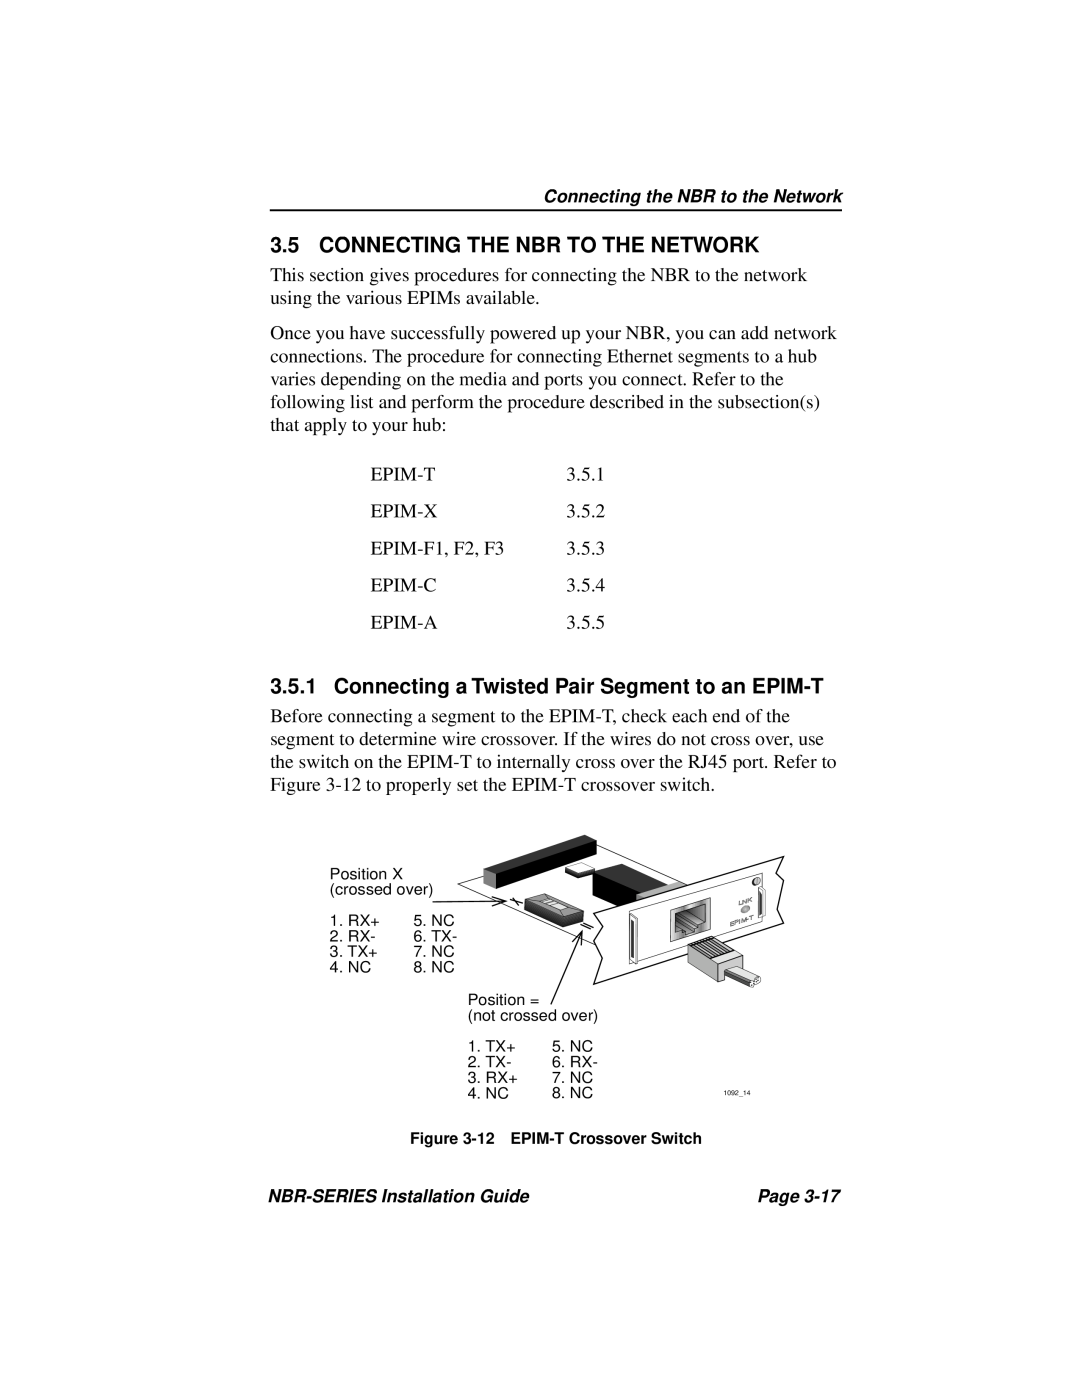 Cabletron Systems NBR-220, NBR-420 manual Connecting The Nbr To The Network, Connecting a Twisted Pair Segment to an EPIM-T 